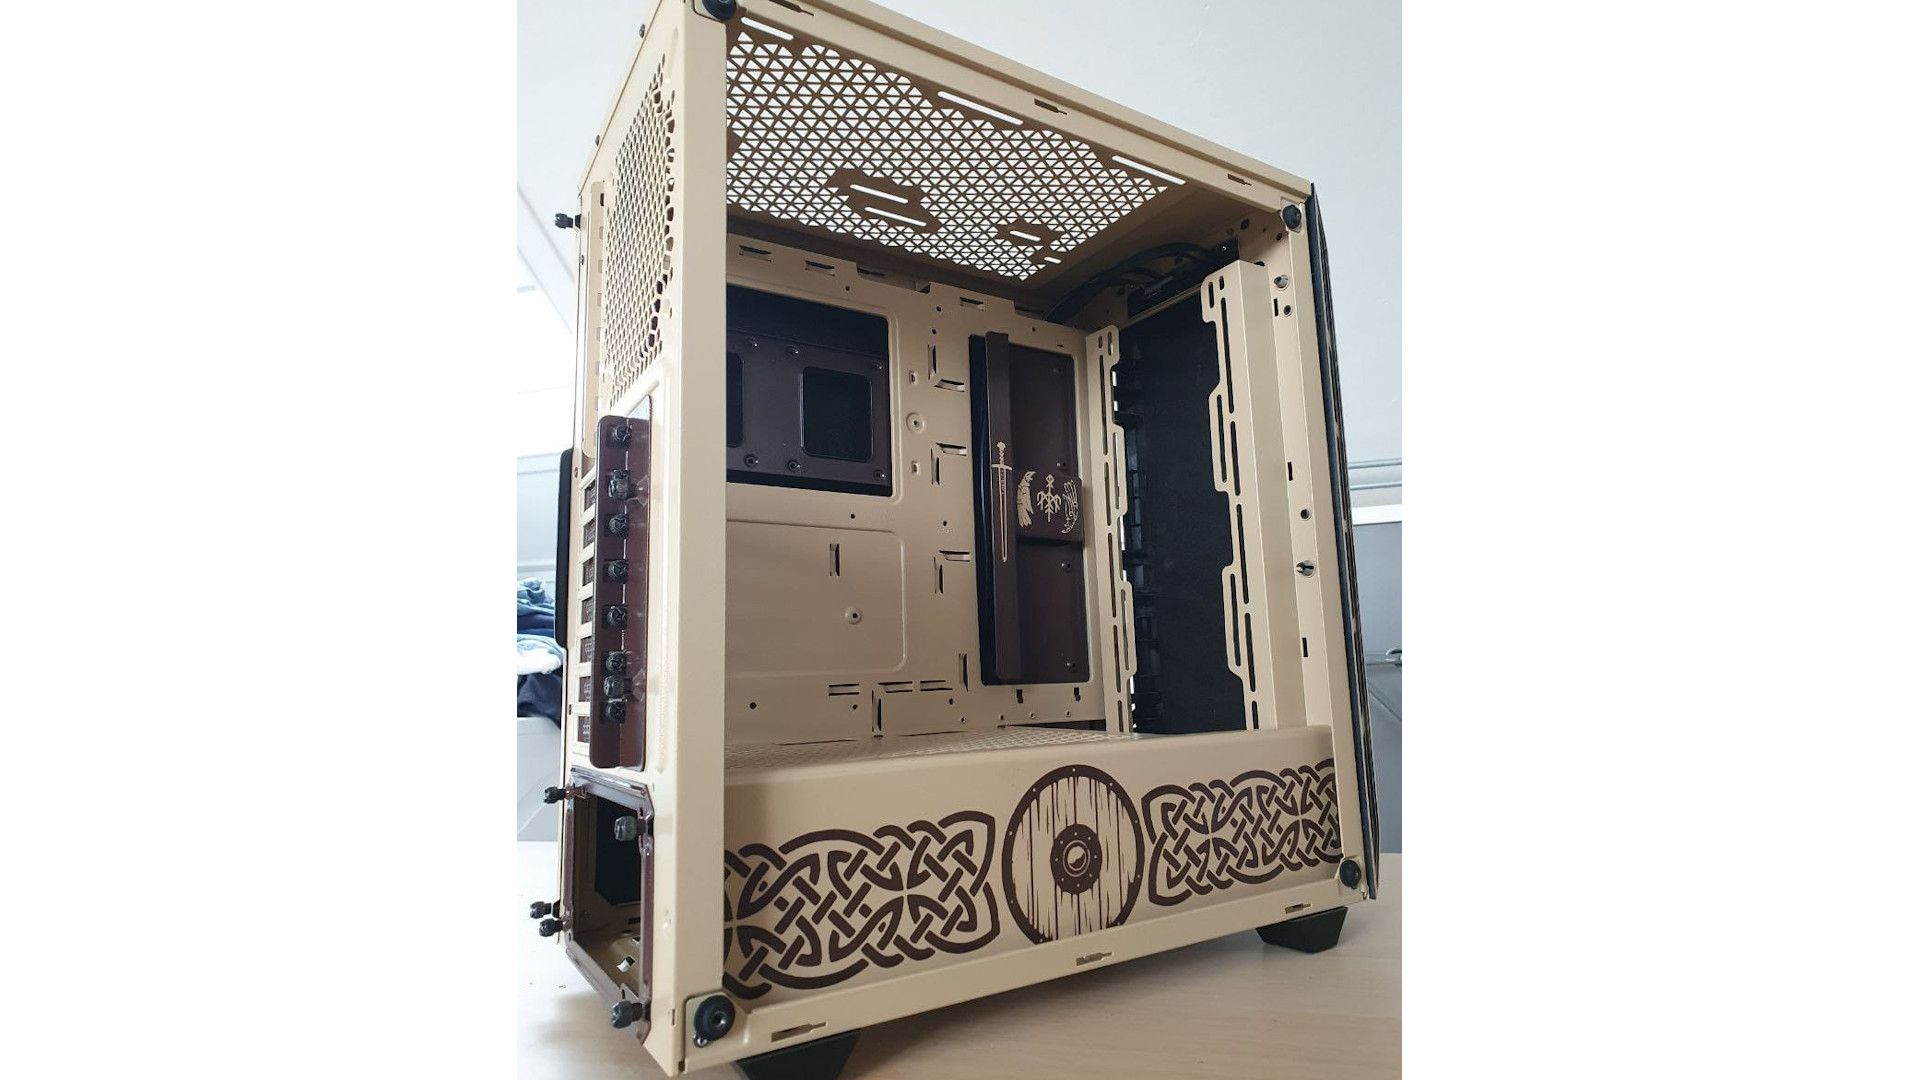 The inside of a custom PC case which has a viking theme